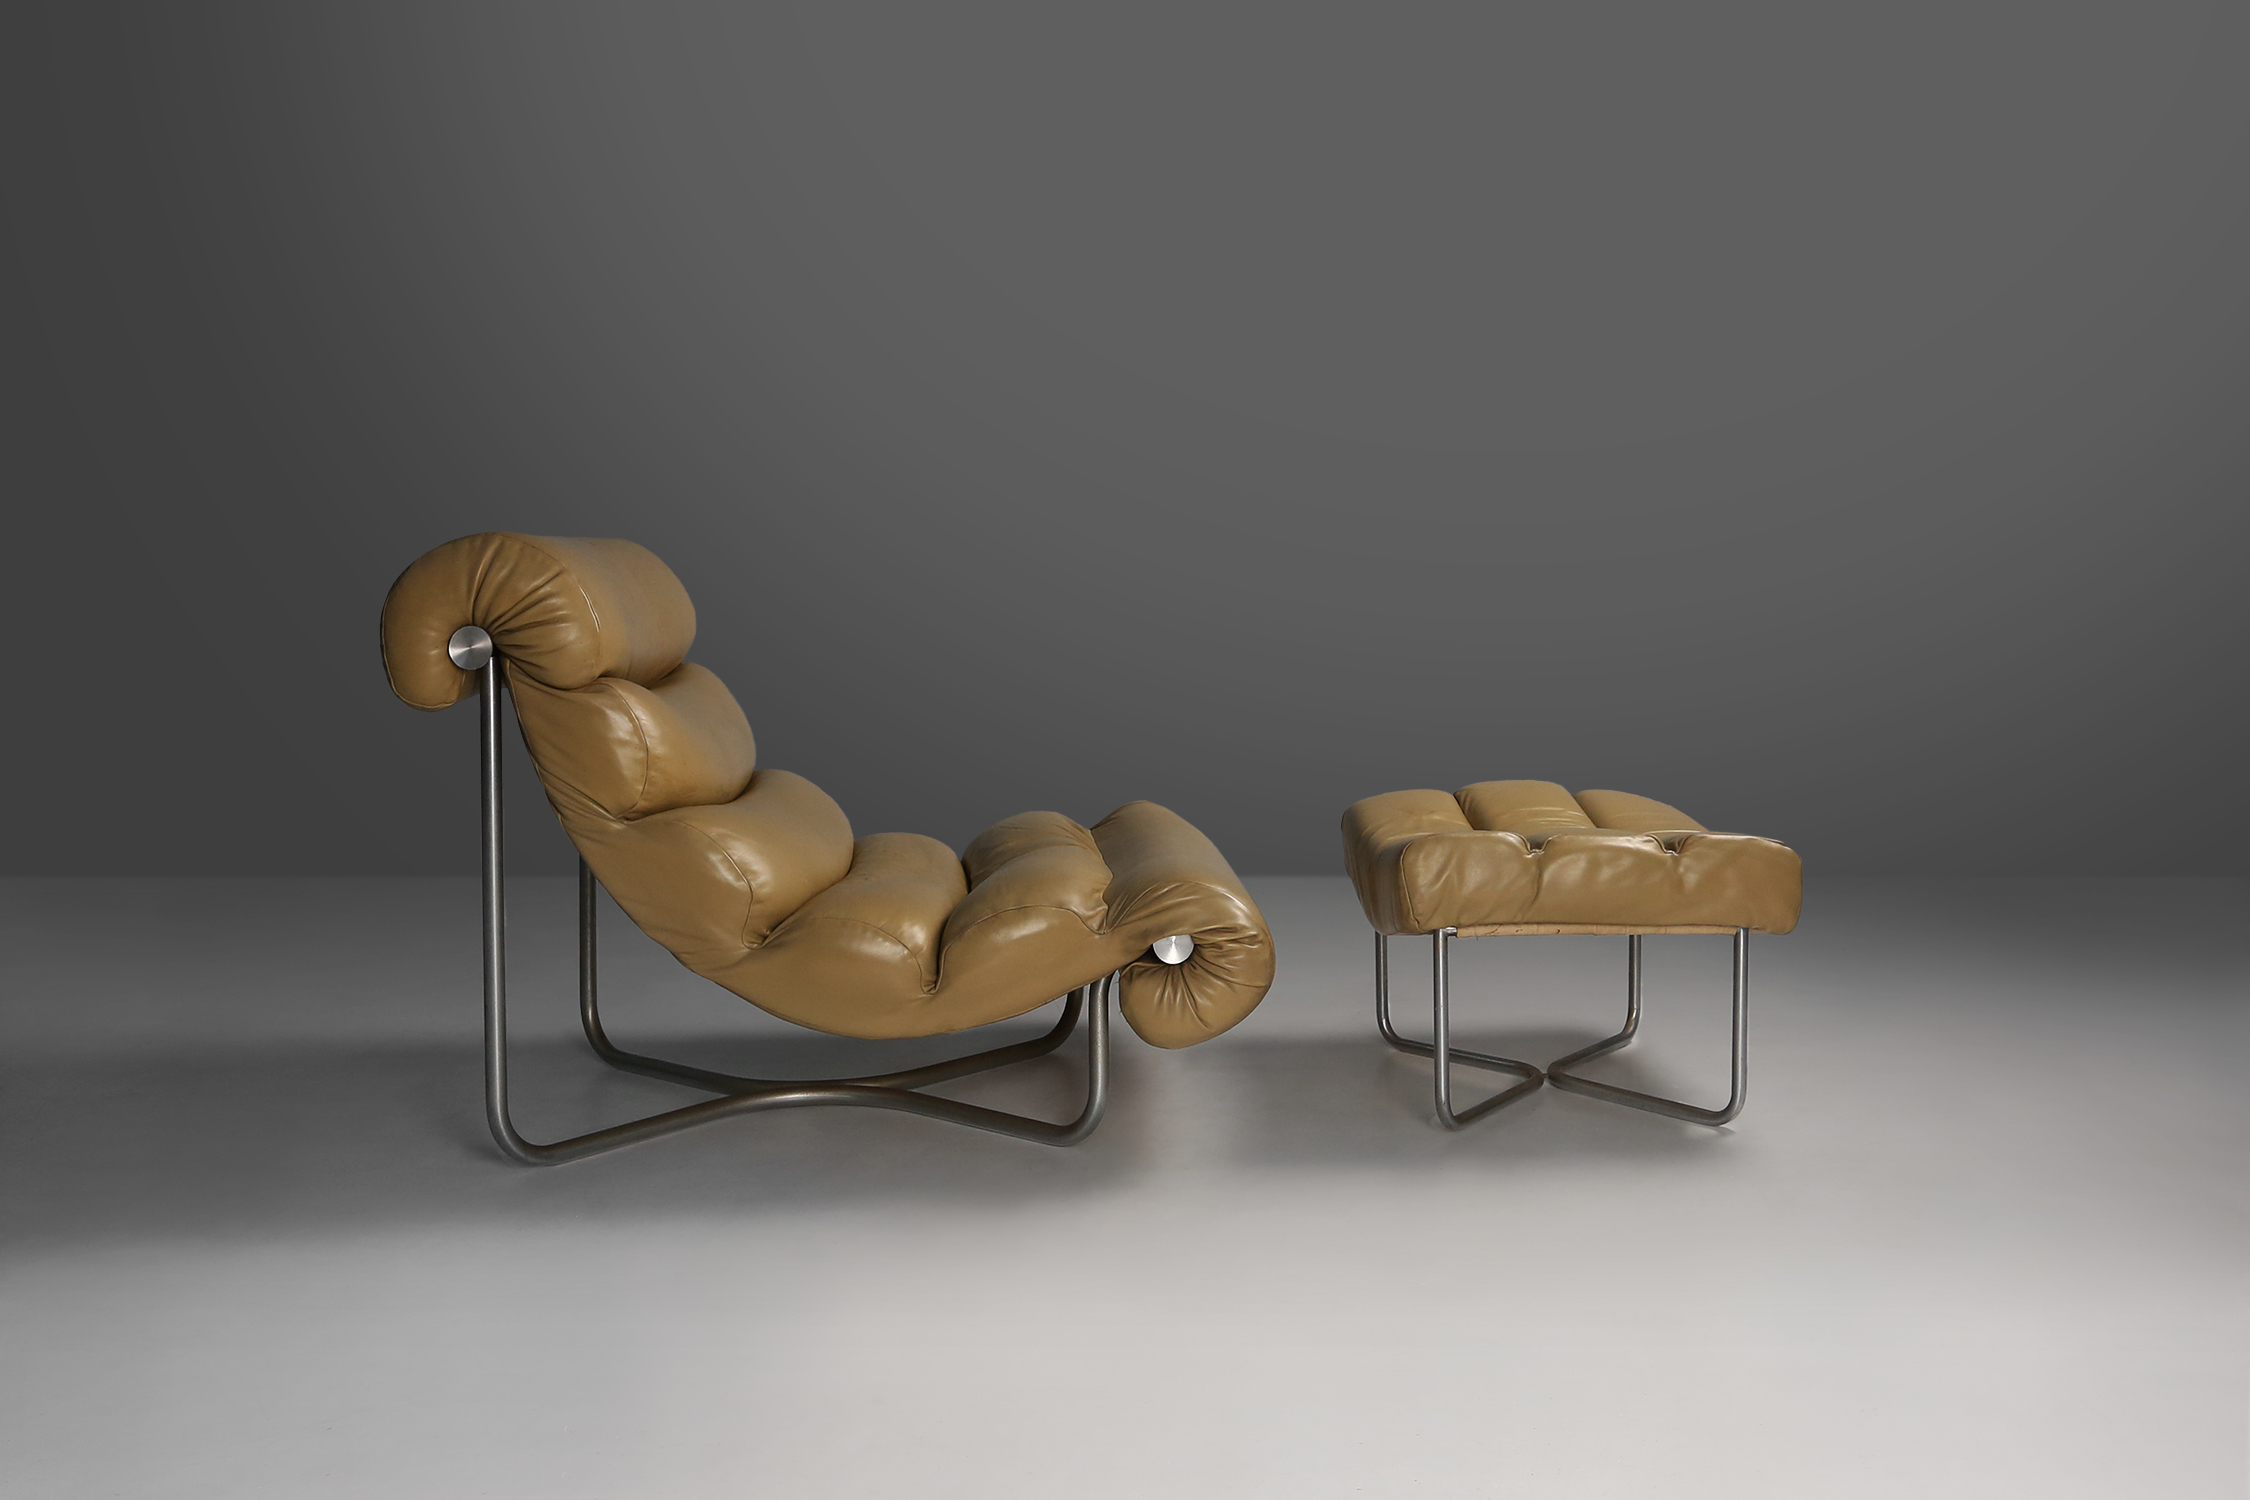 Mid-Century Modern 'Glasgow' Chair by Georges van Rijck for Beaufortthumbnail